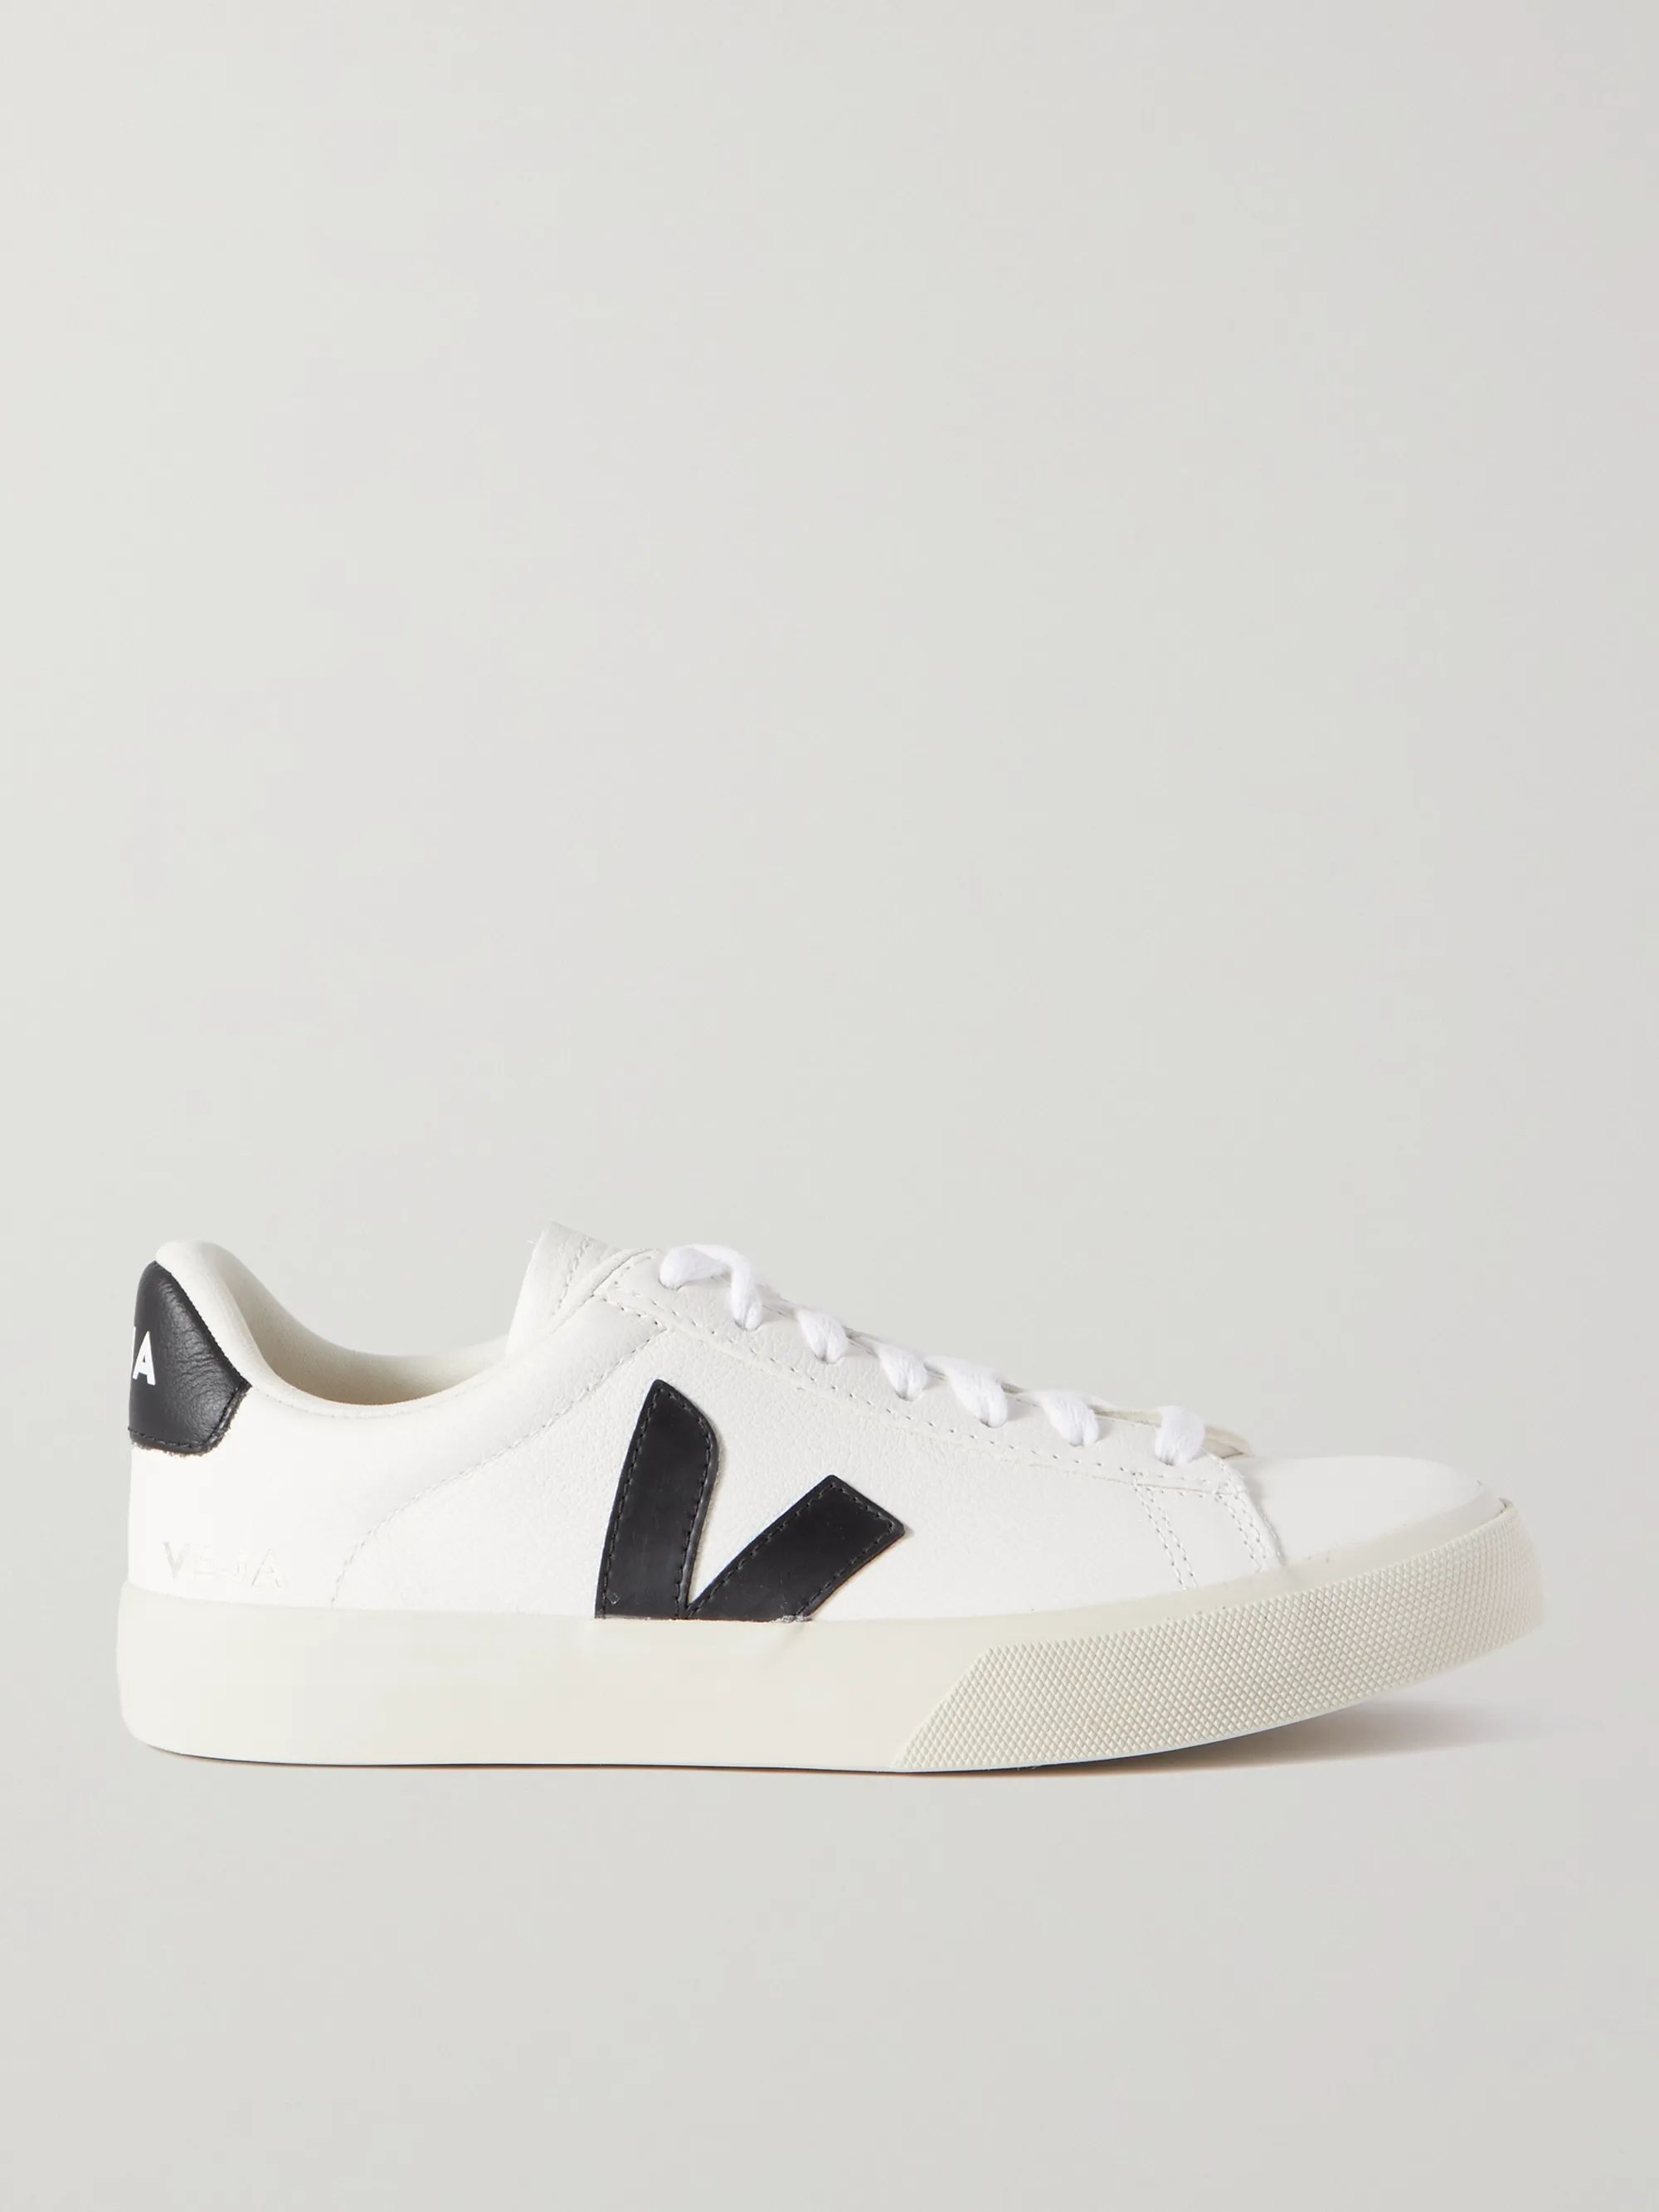 Campo textured-leather sneakers | NET-A-PORTER (UK & EU)